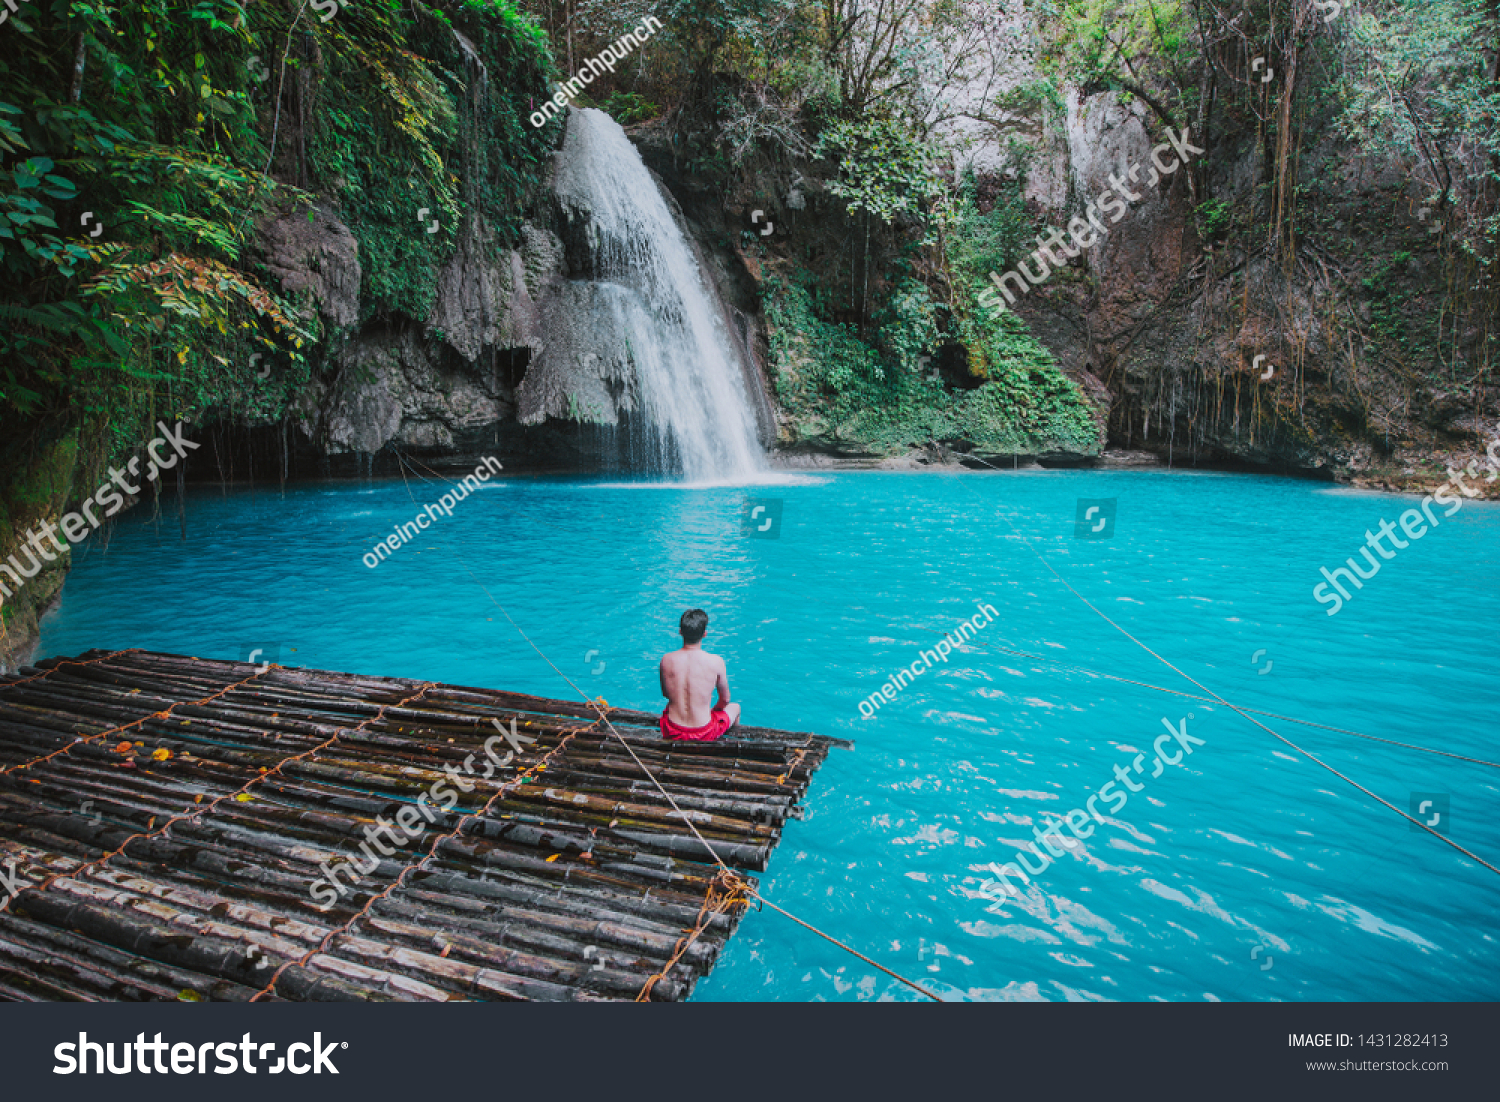 The azure Kawasan waterfall in cebu. The maining attraction on the island. Concept about nature and wanderlust traveling #1431282413